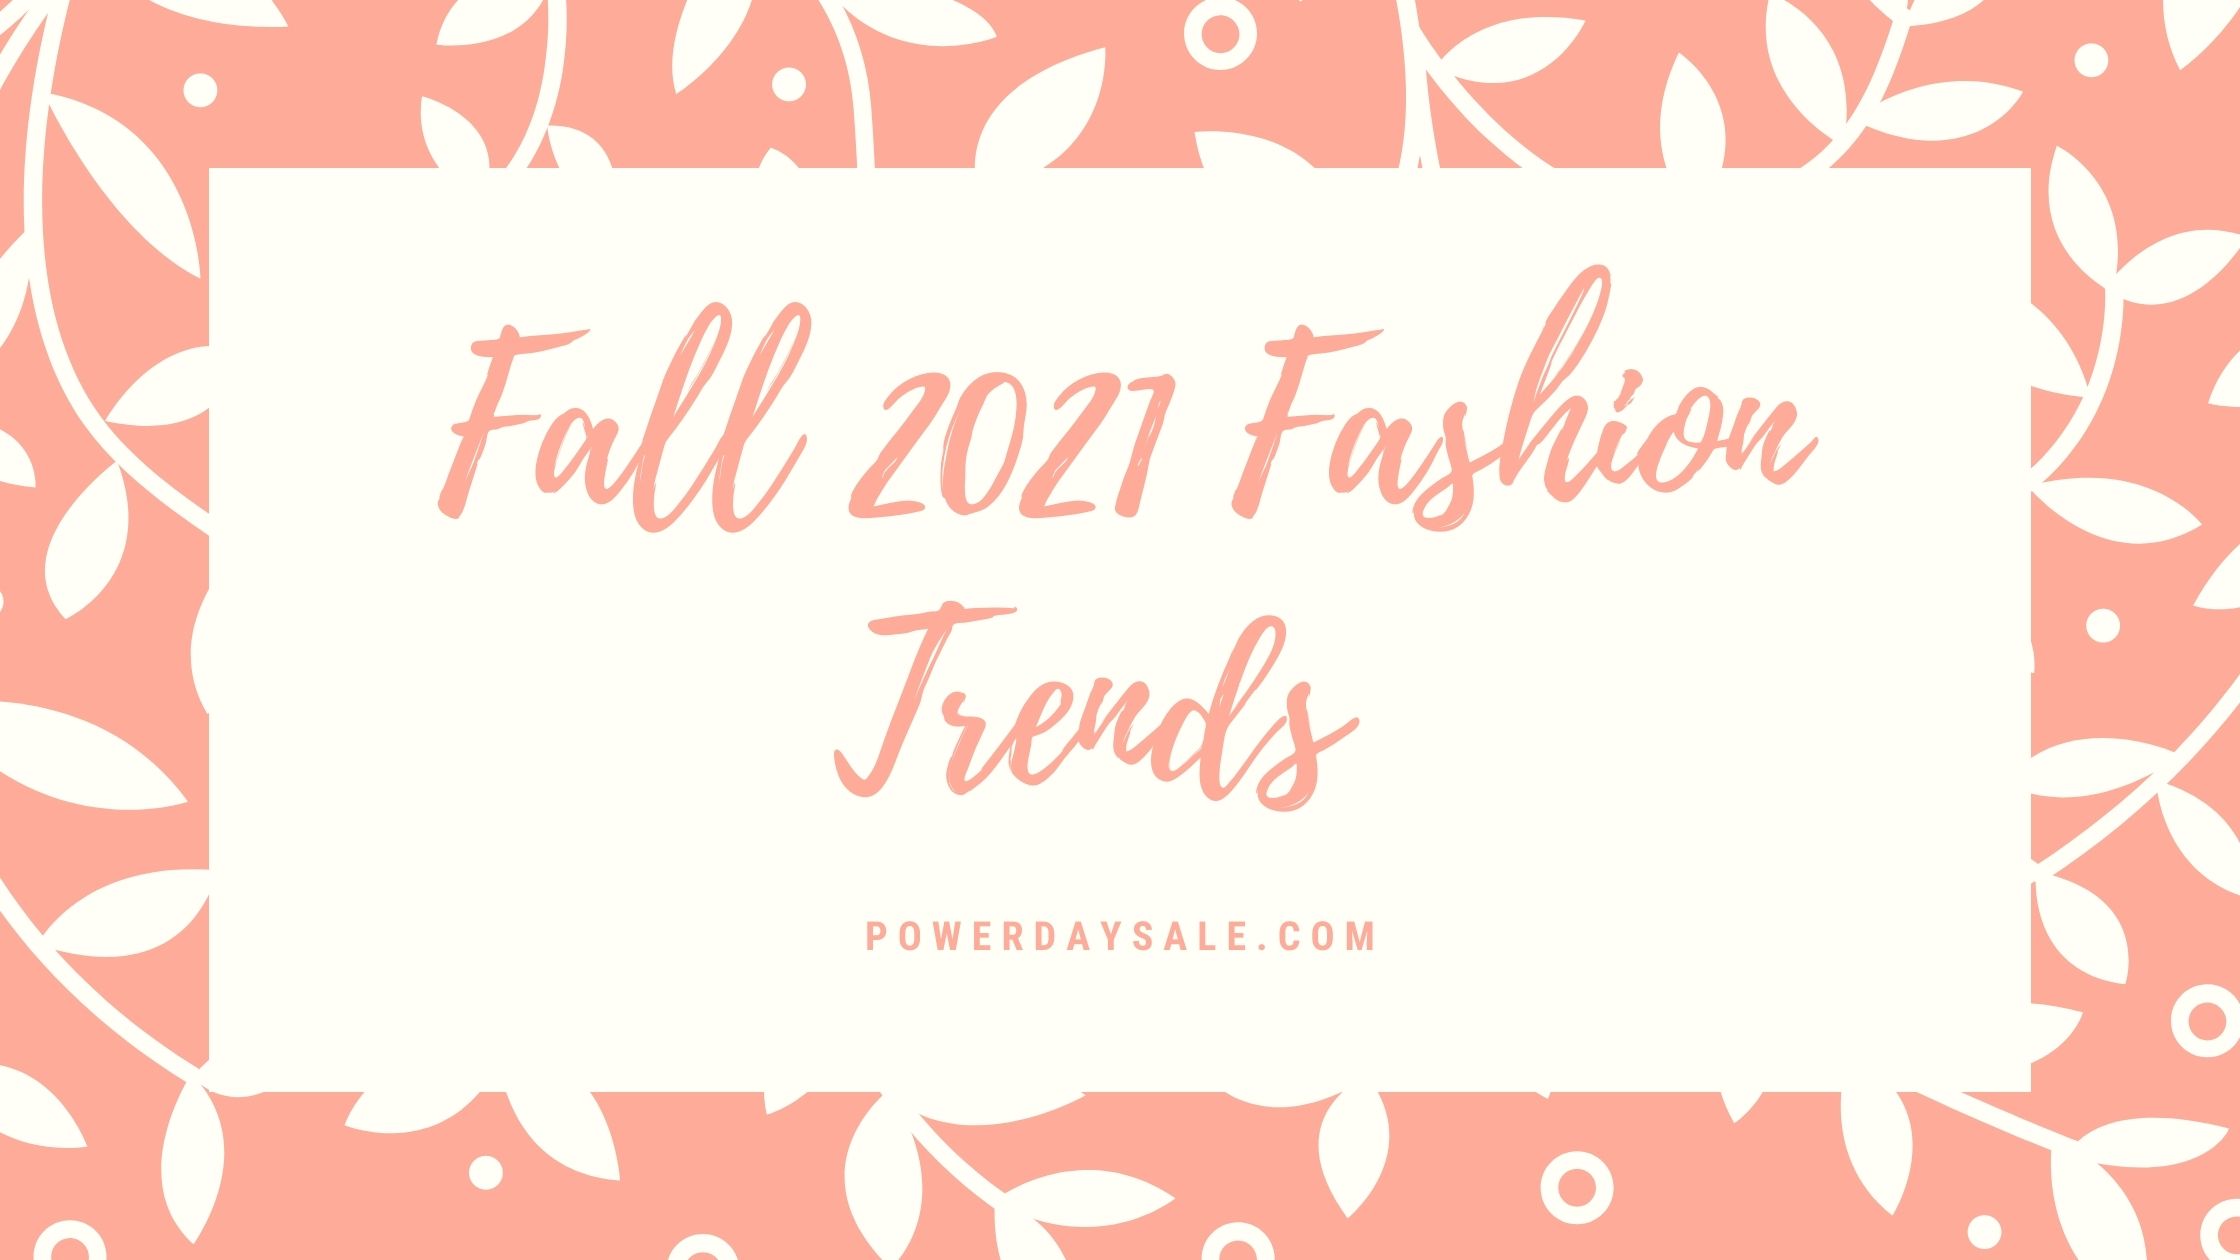 You are currently viewing Fall 2021 Fashion Trends